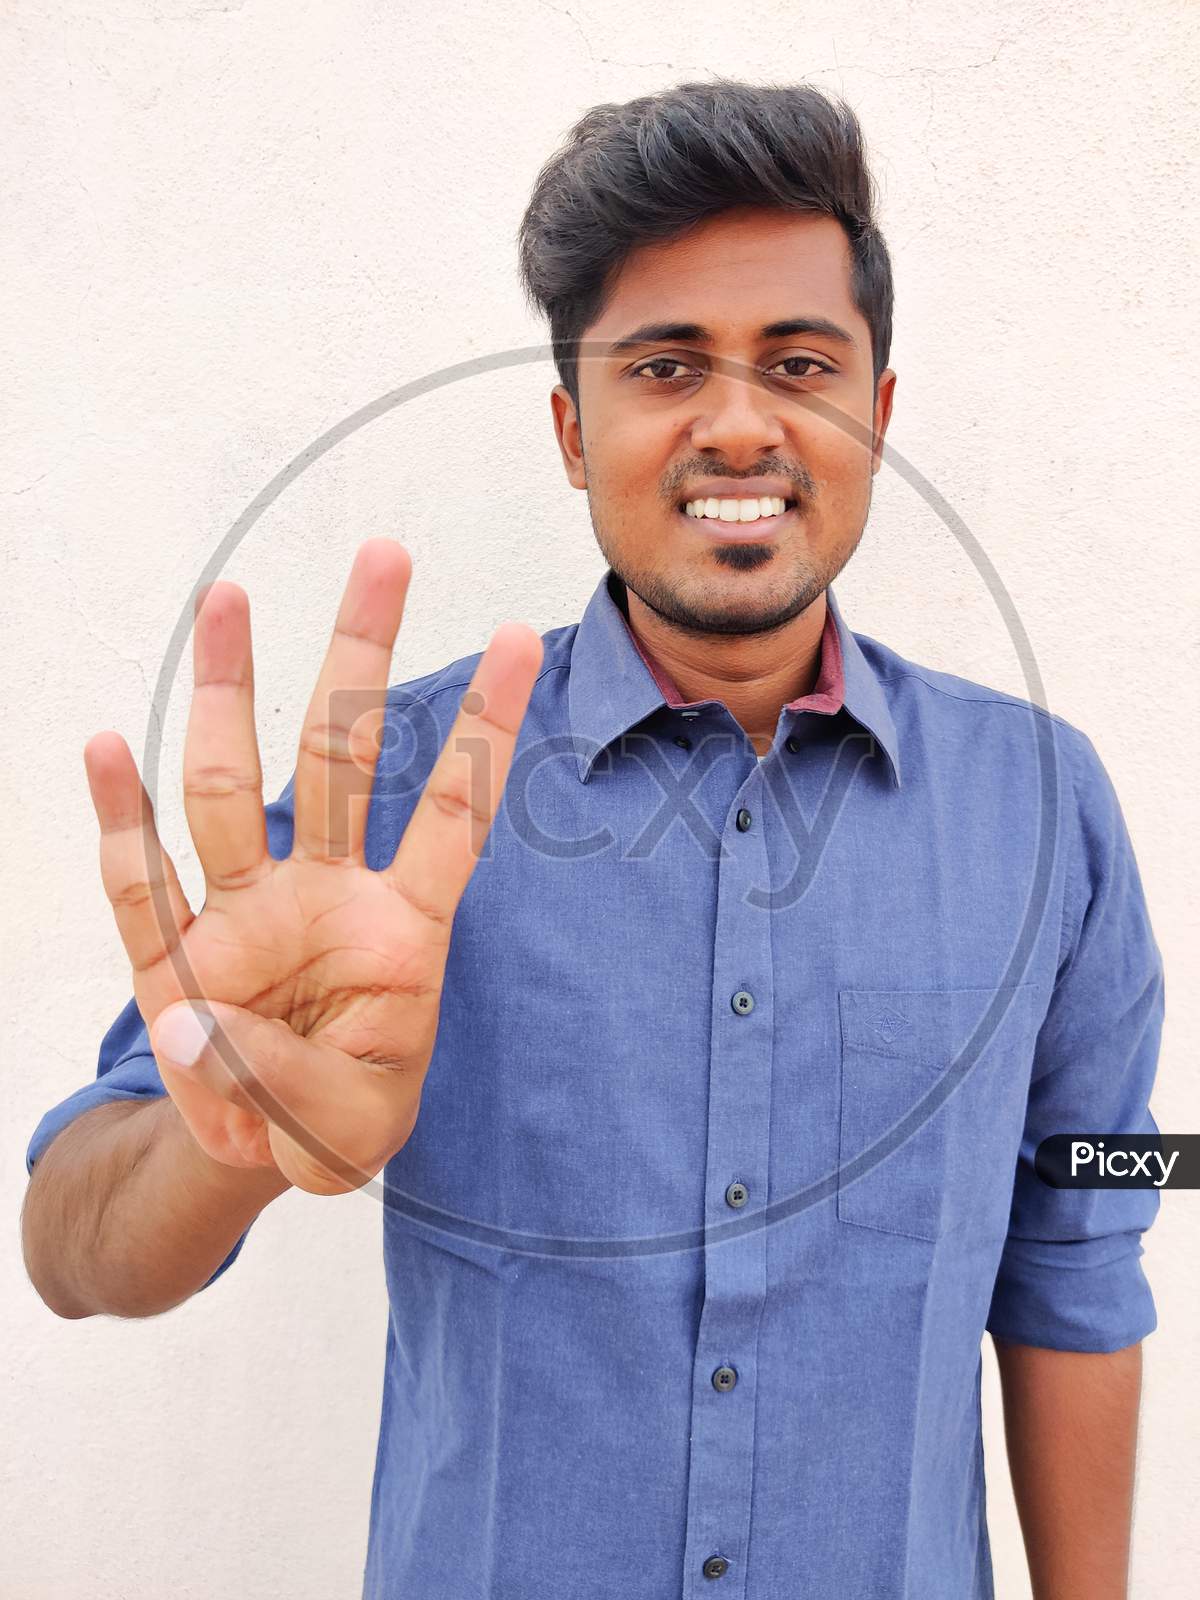 Smiling South Indian Young Man Wearing Blue Shirt Pointing Up With Fingers Number Four. Isolated On White Background.